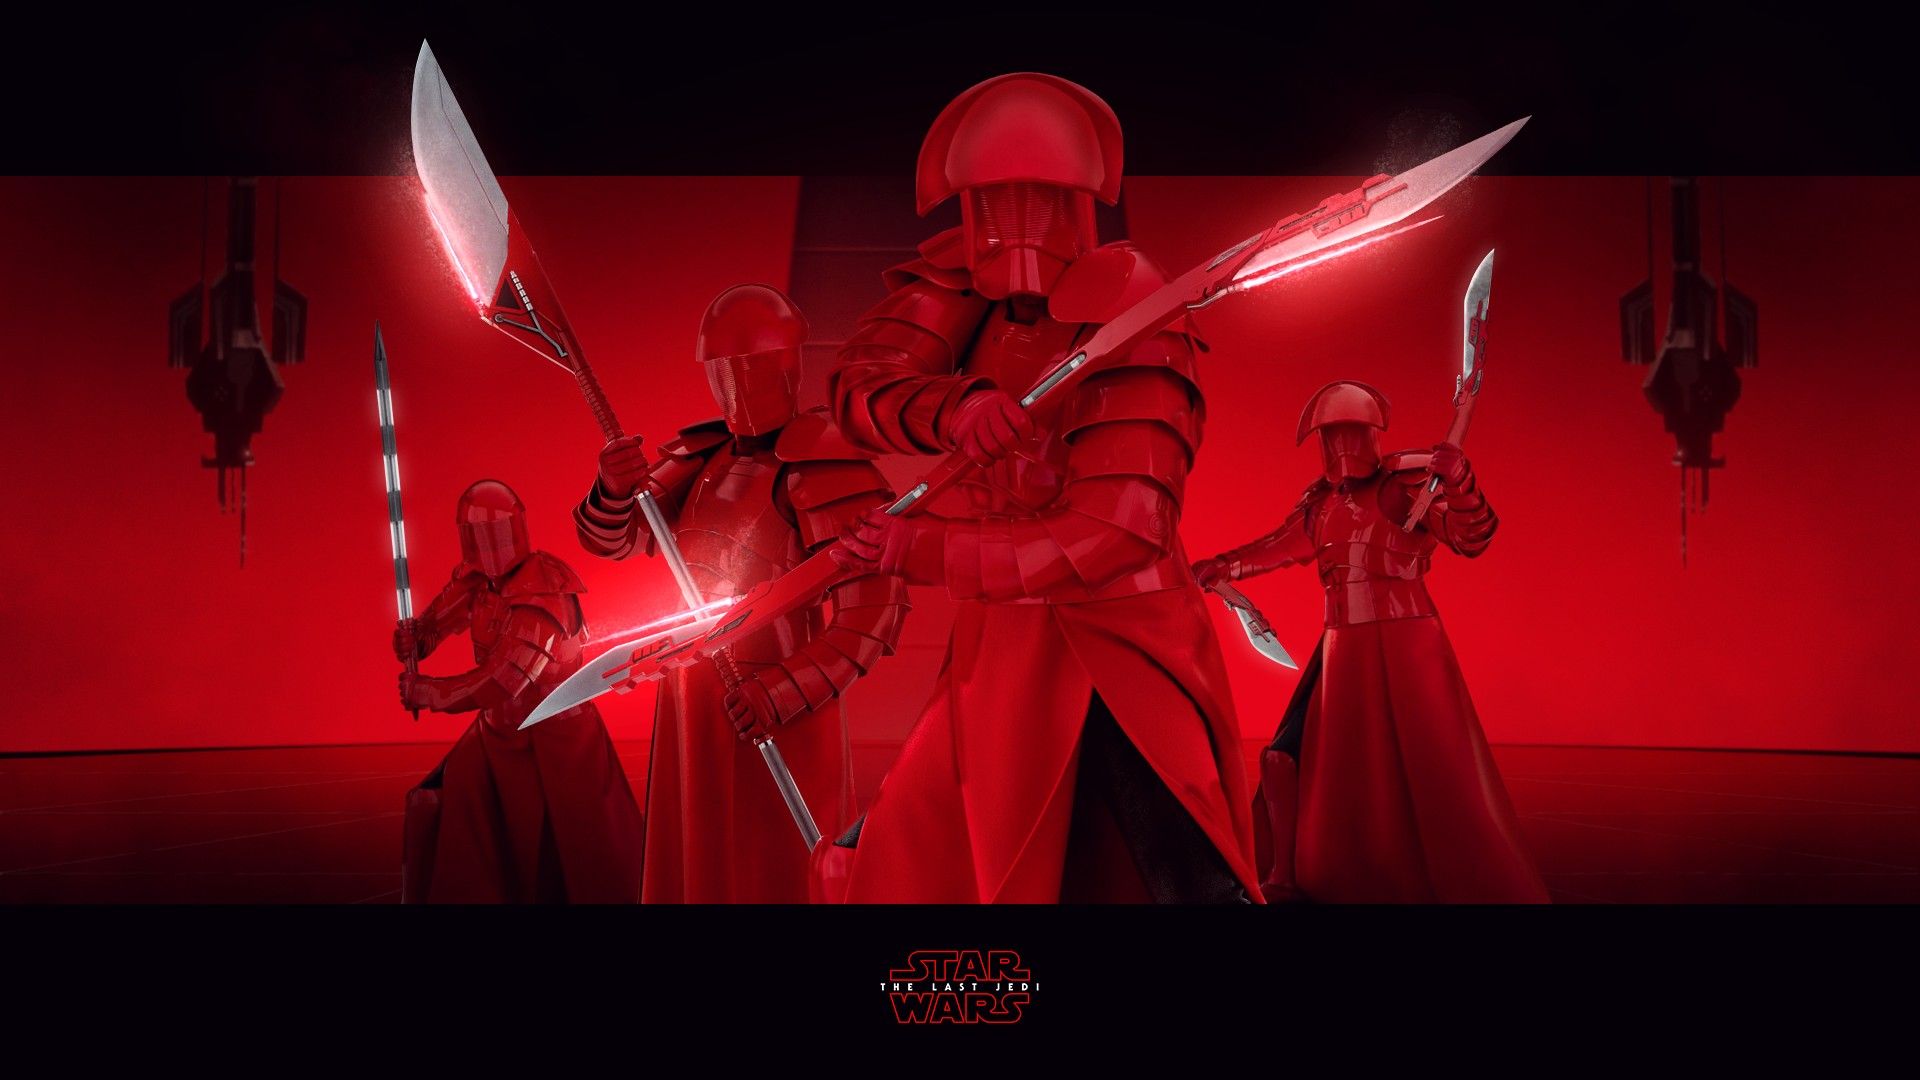 Star Wars, Star Wars: The Last Jedi, Red, The First Order Wallpaper HD / Desktop and Mobile Background